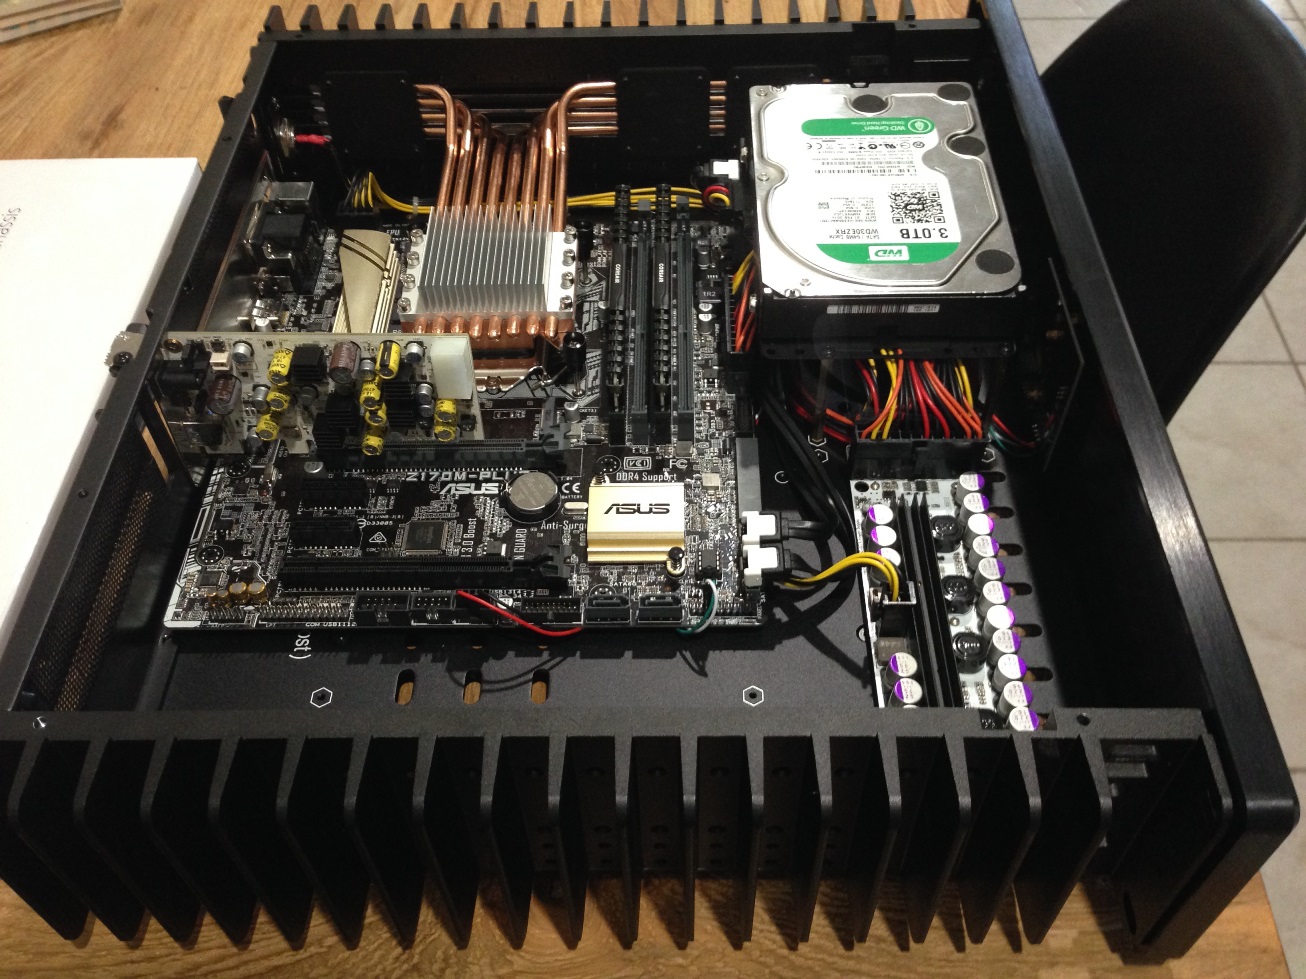 HDPLEX 2nd Gen H5 fanless PC case with SoTM USB card and Intel 6100T